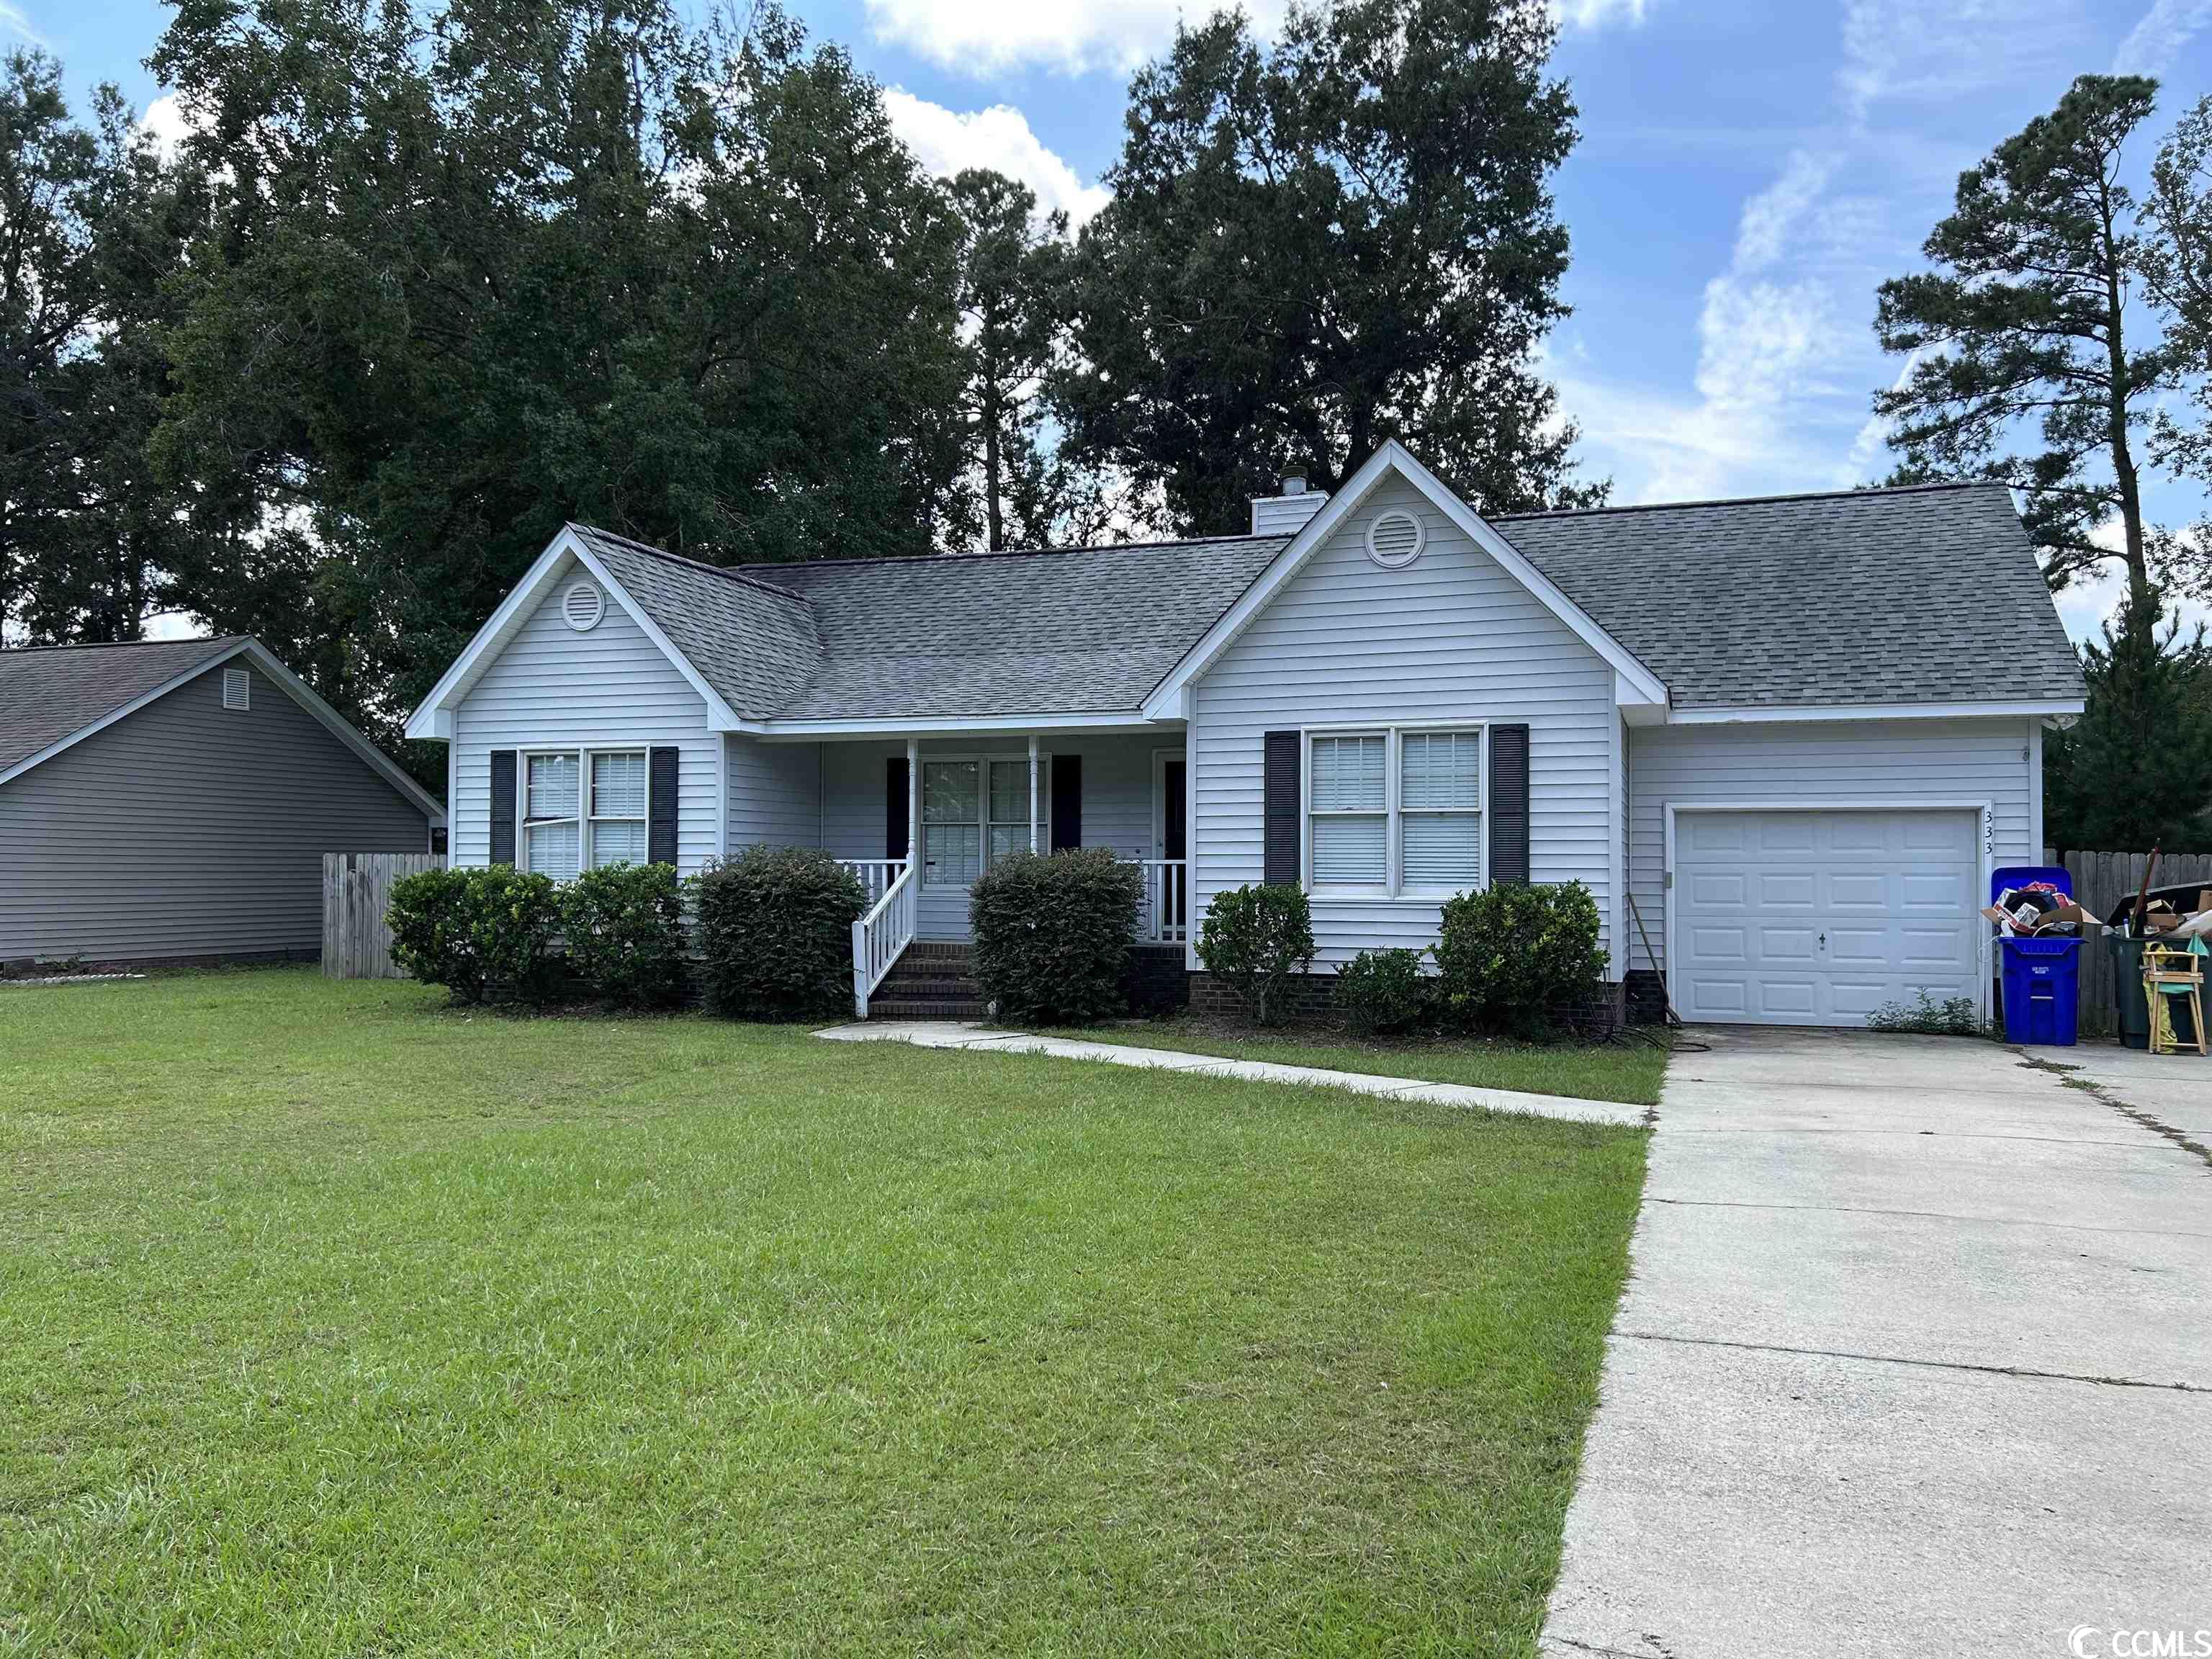 no hoa! handyman special.  this 3 bed, 2 bath home needs some tlc.  features include fireplace, fenced in back yard, large storage/shop, and deck.  the roof, hvac, and water heater are less than 5 yrs old.